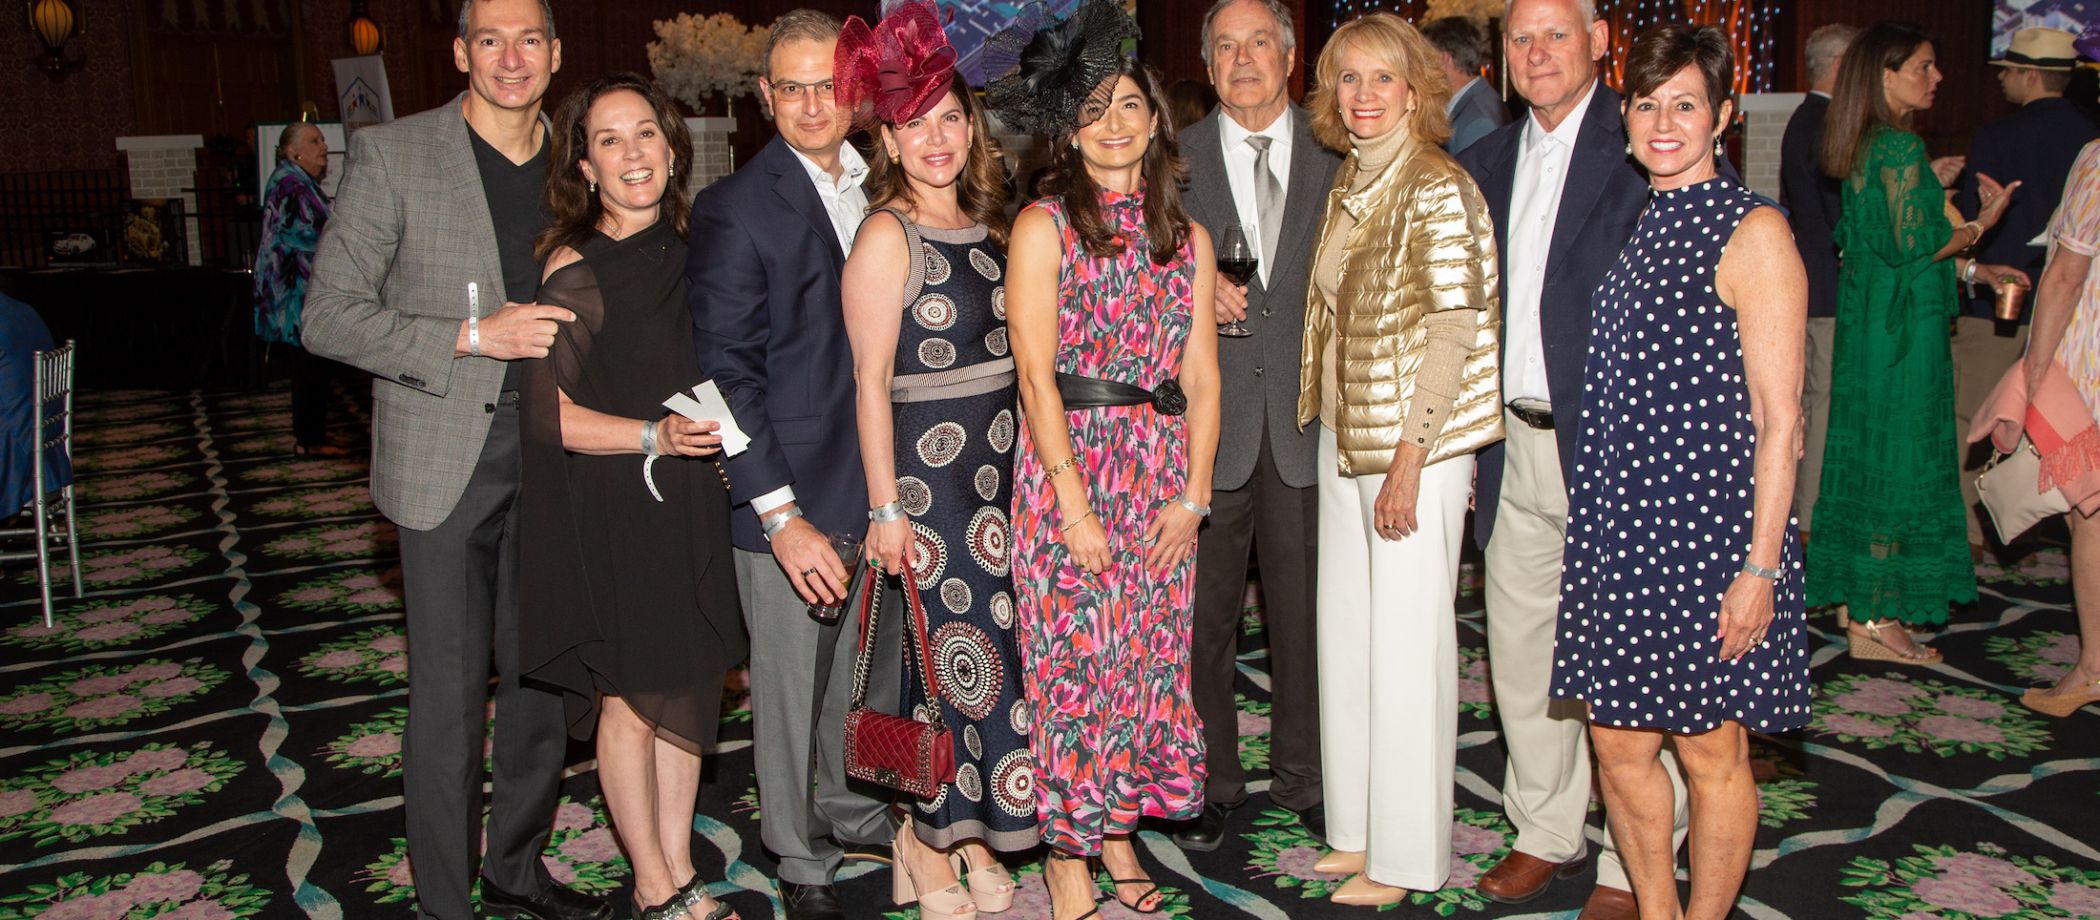 Kentucky Derby and Charitable Dinner